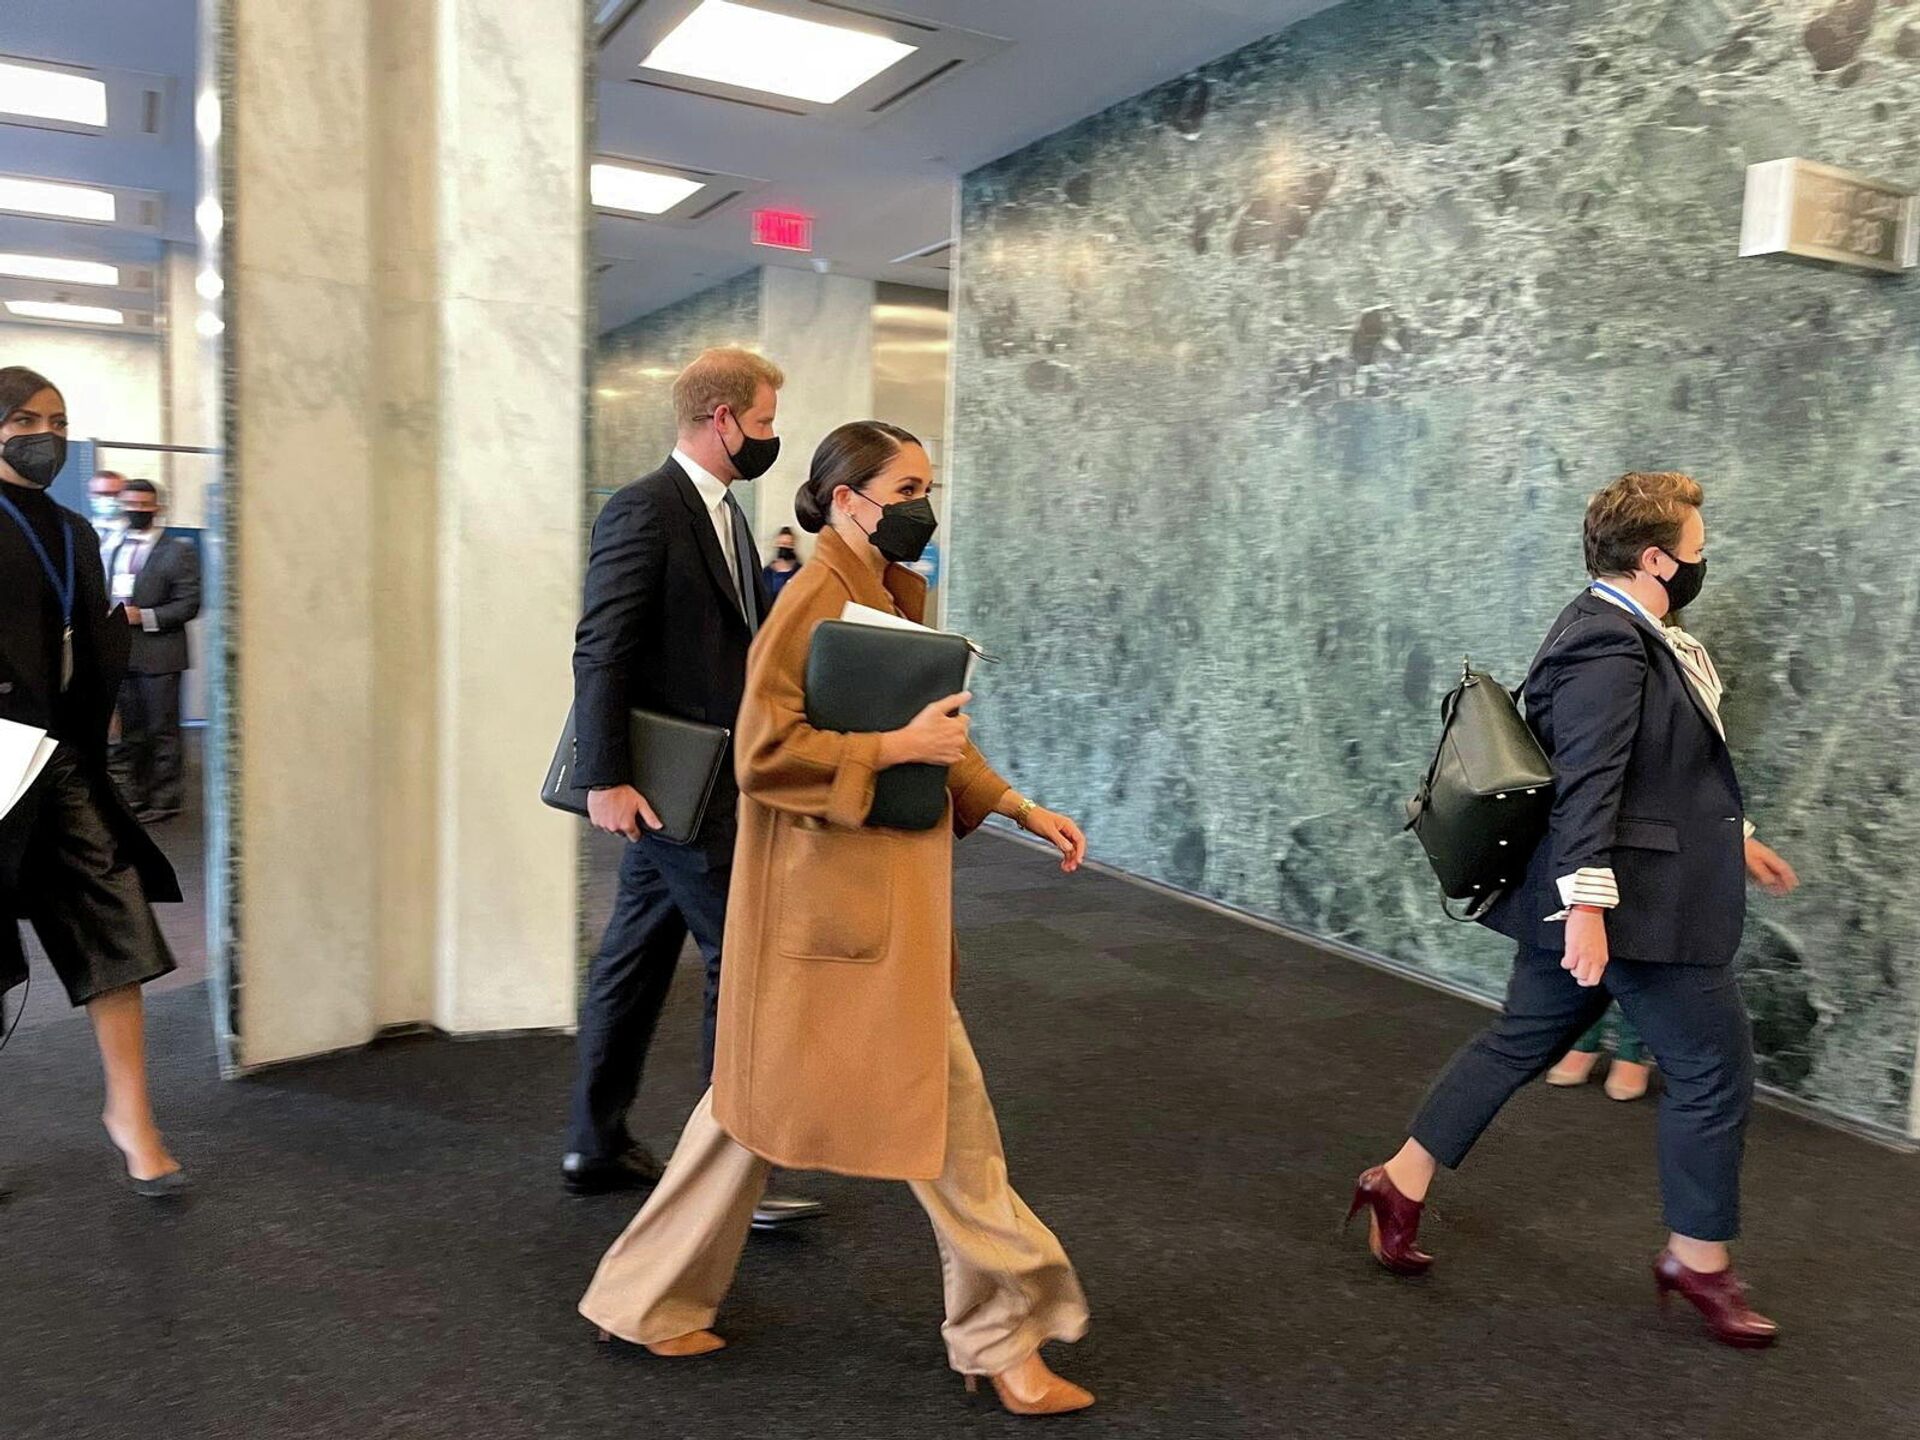 Prince Harry and Meghan Markle arrive at the United Nations to meet with UN Deputy Secretary-General Amina Mohammed, in New York City, US, September 25, 2021 - Sputnik International, 1920, 27.09.2021